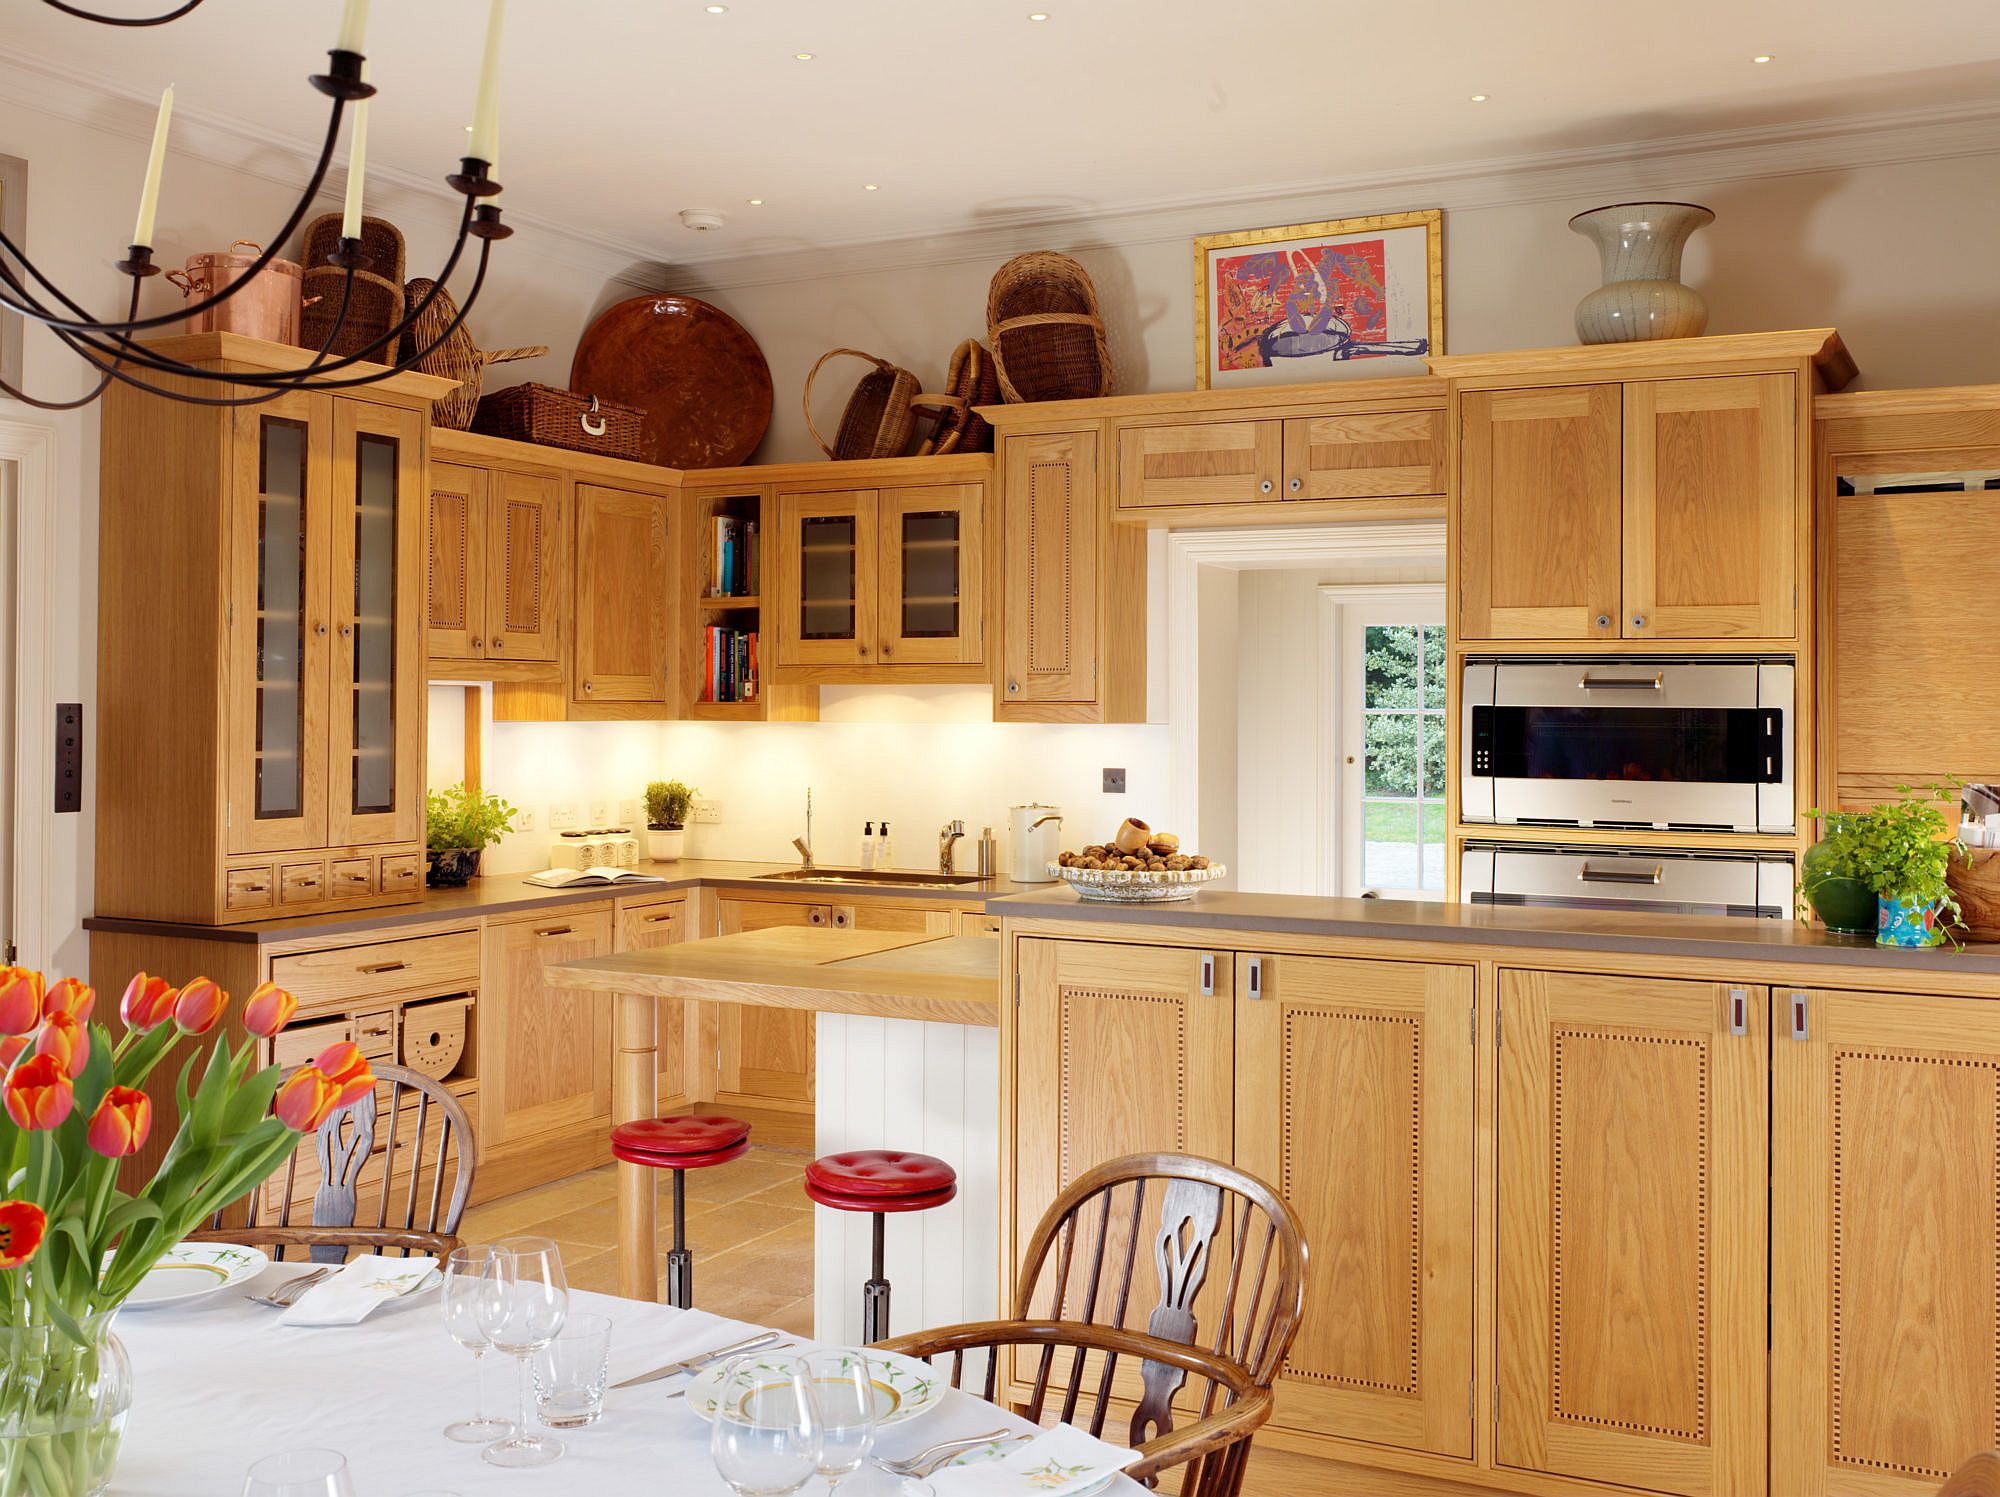 Woodsy-traditional-kitchen-filled-with-natural-light